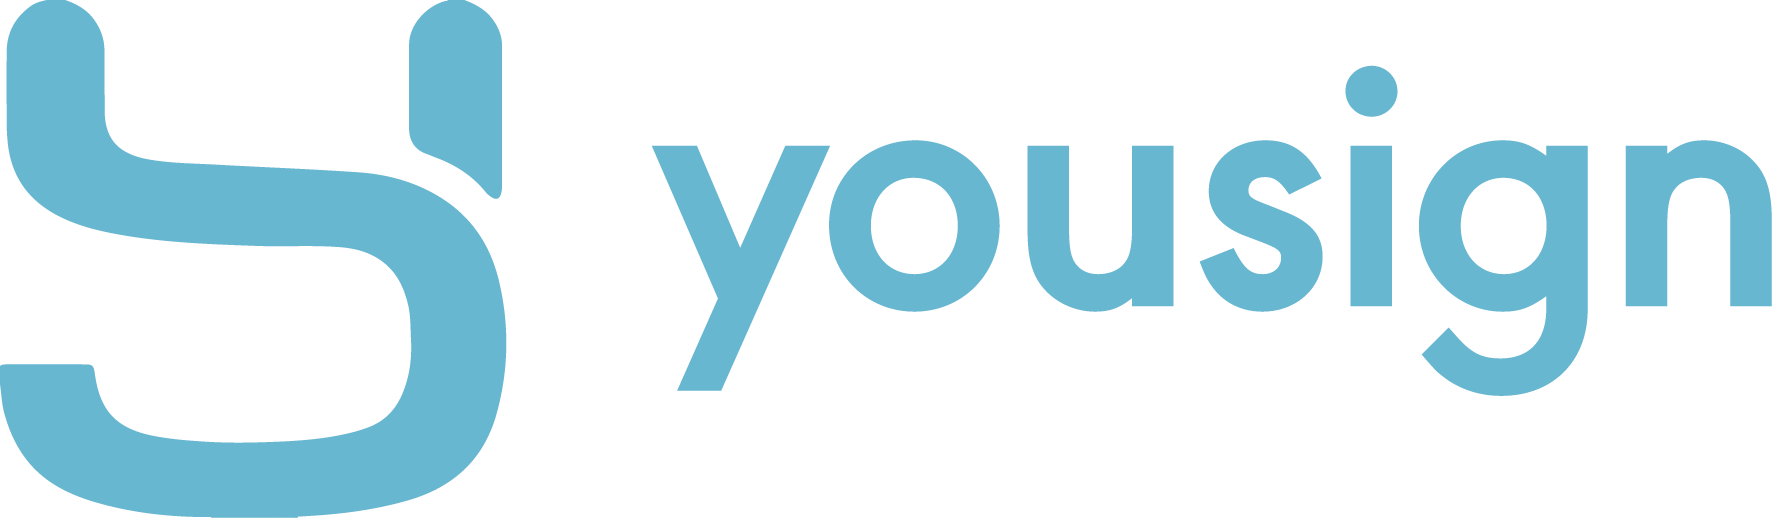 Yousign Signature Electronique Immobilier 2 Logo